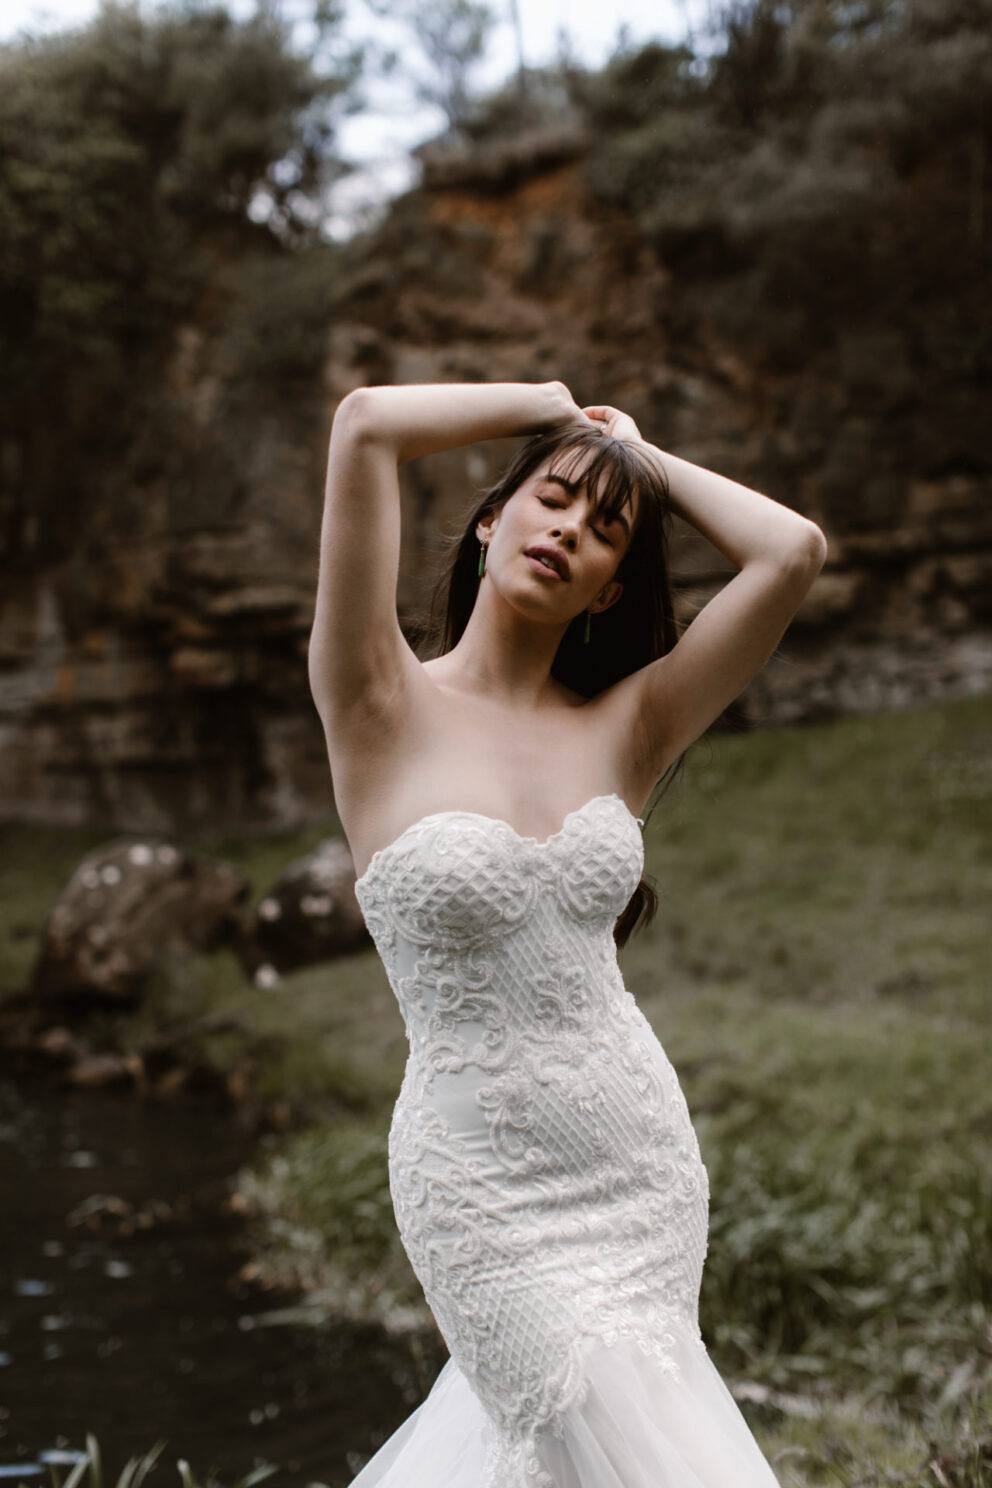 Organic lace trims this sweetheart strapless fishtail & is used throughout the bodice while small beaded florals give this wedding dress an artful look.